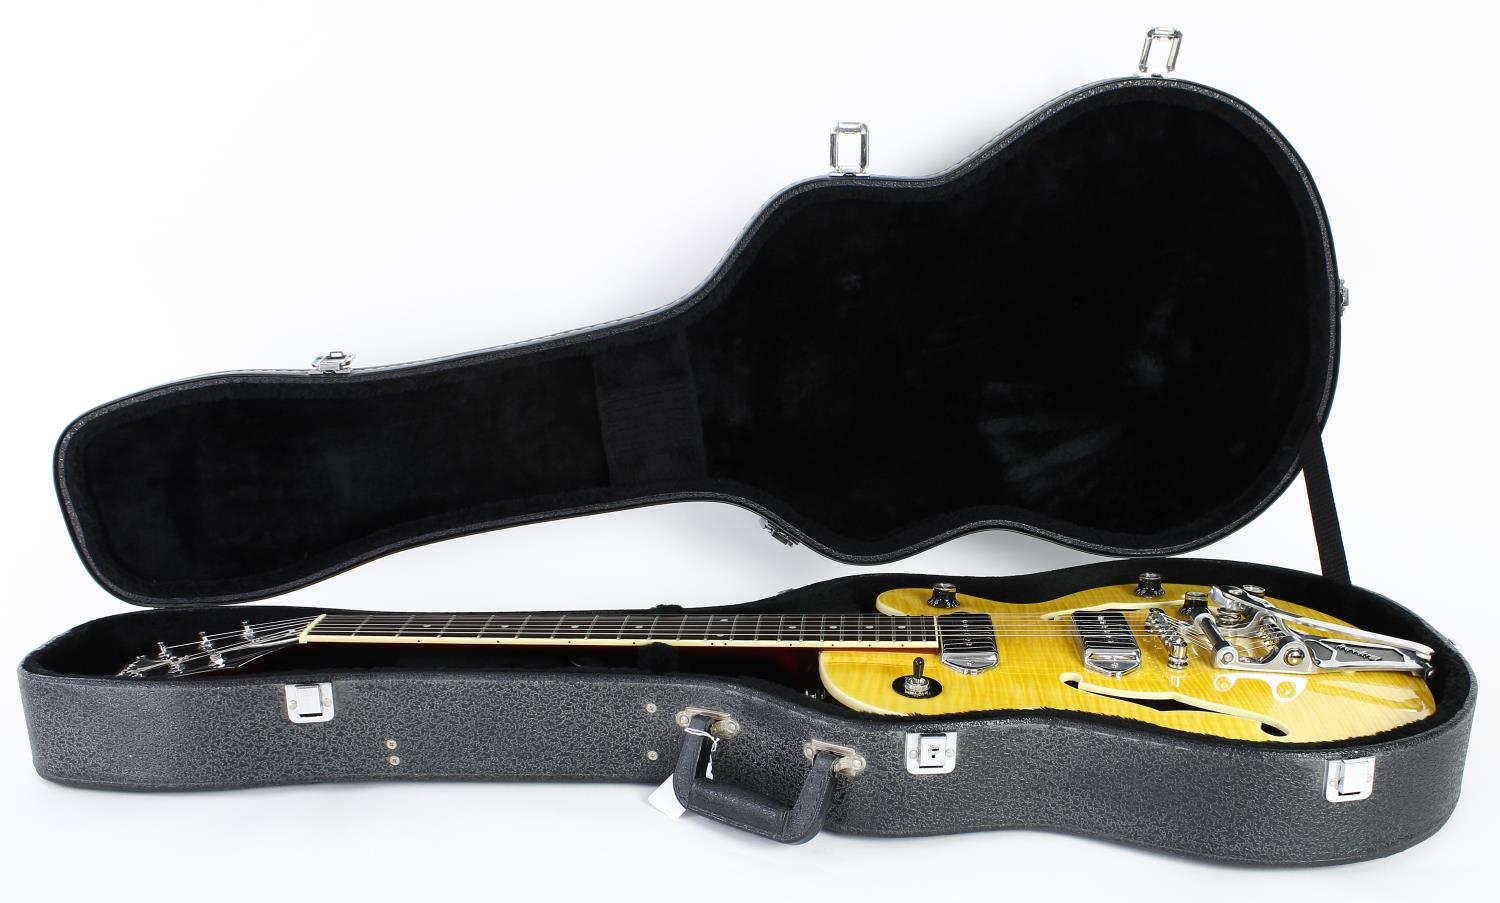 2003 Epiphone Wildkat semi-hollow body electric guitar, made in Korea; Body: antique natural - Image 3 of 3